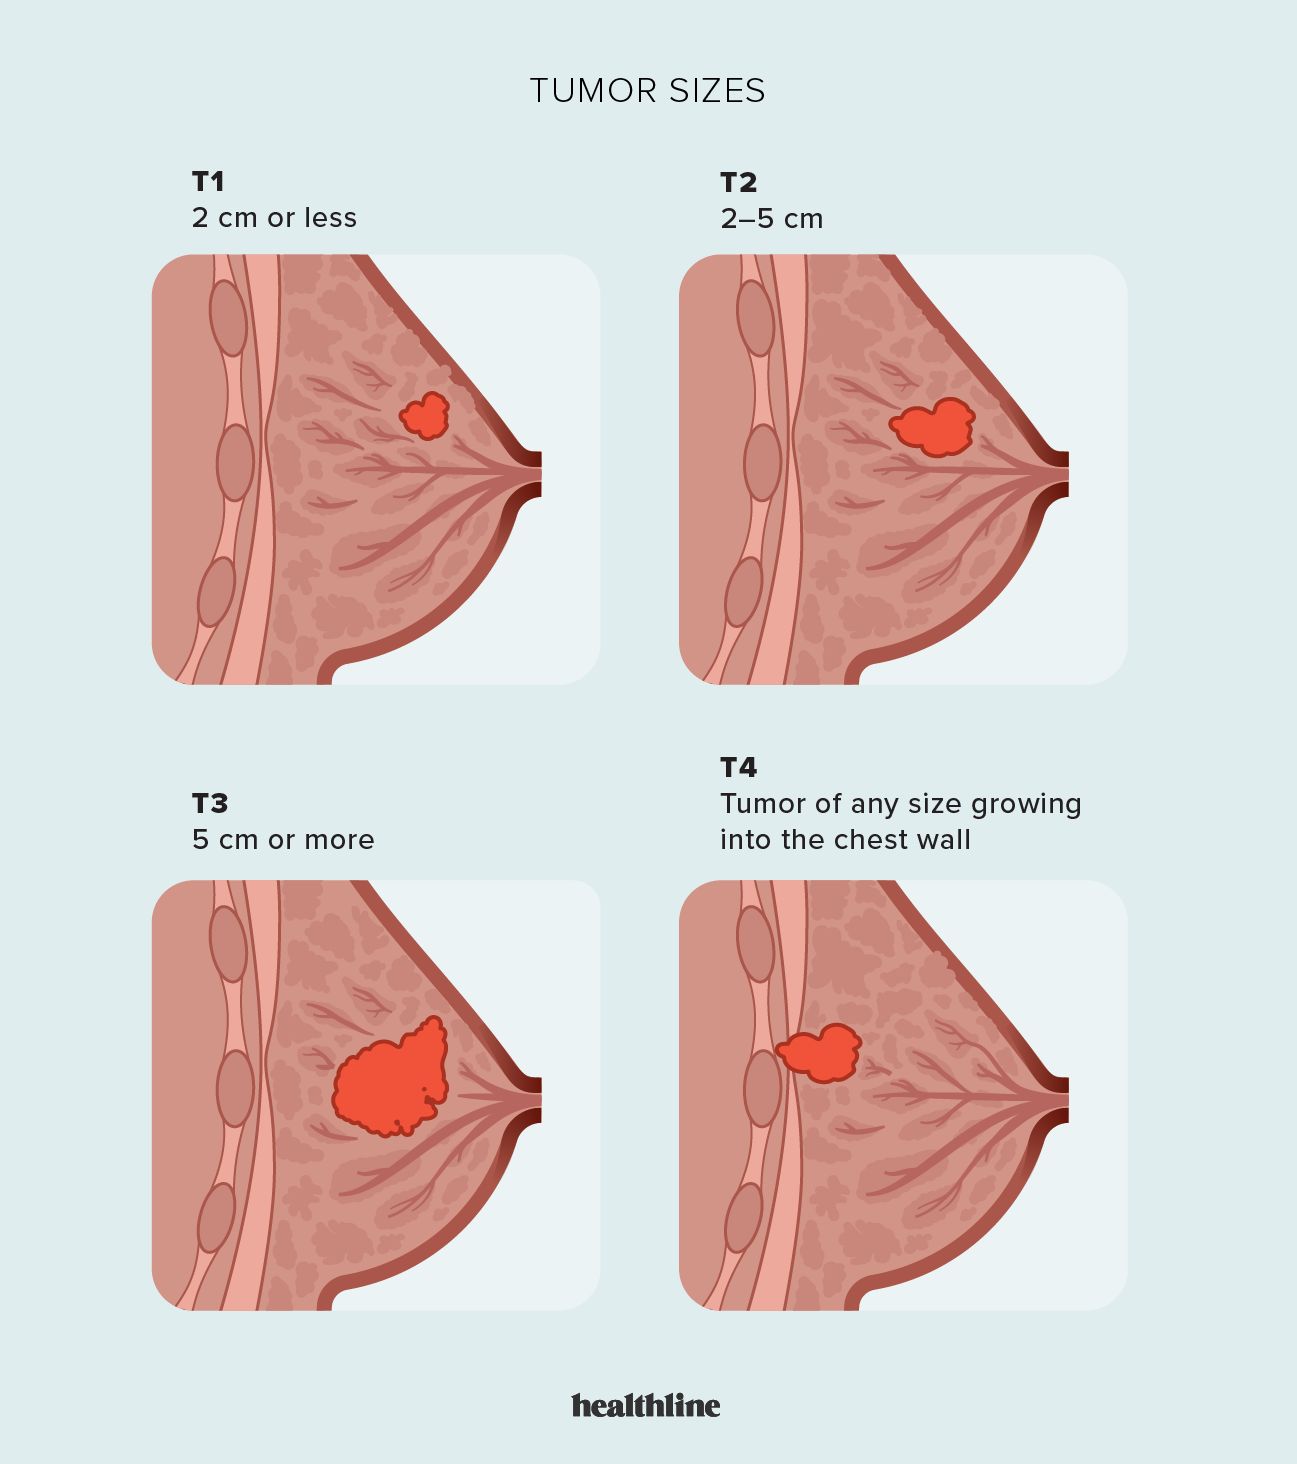 Where Are Breast Cancer Lumps Usually Found?